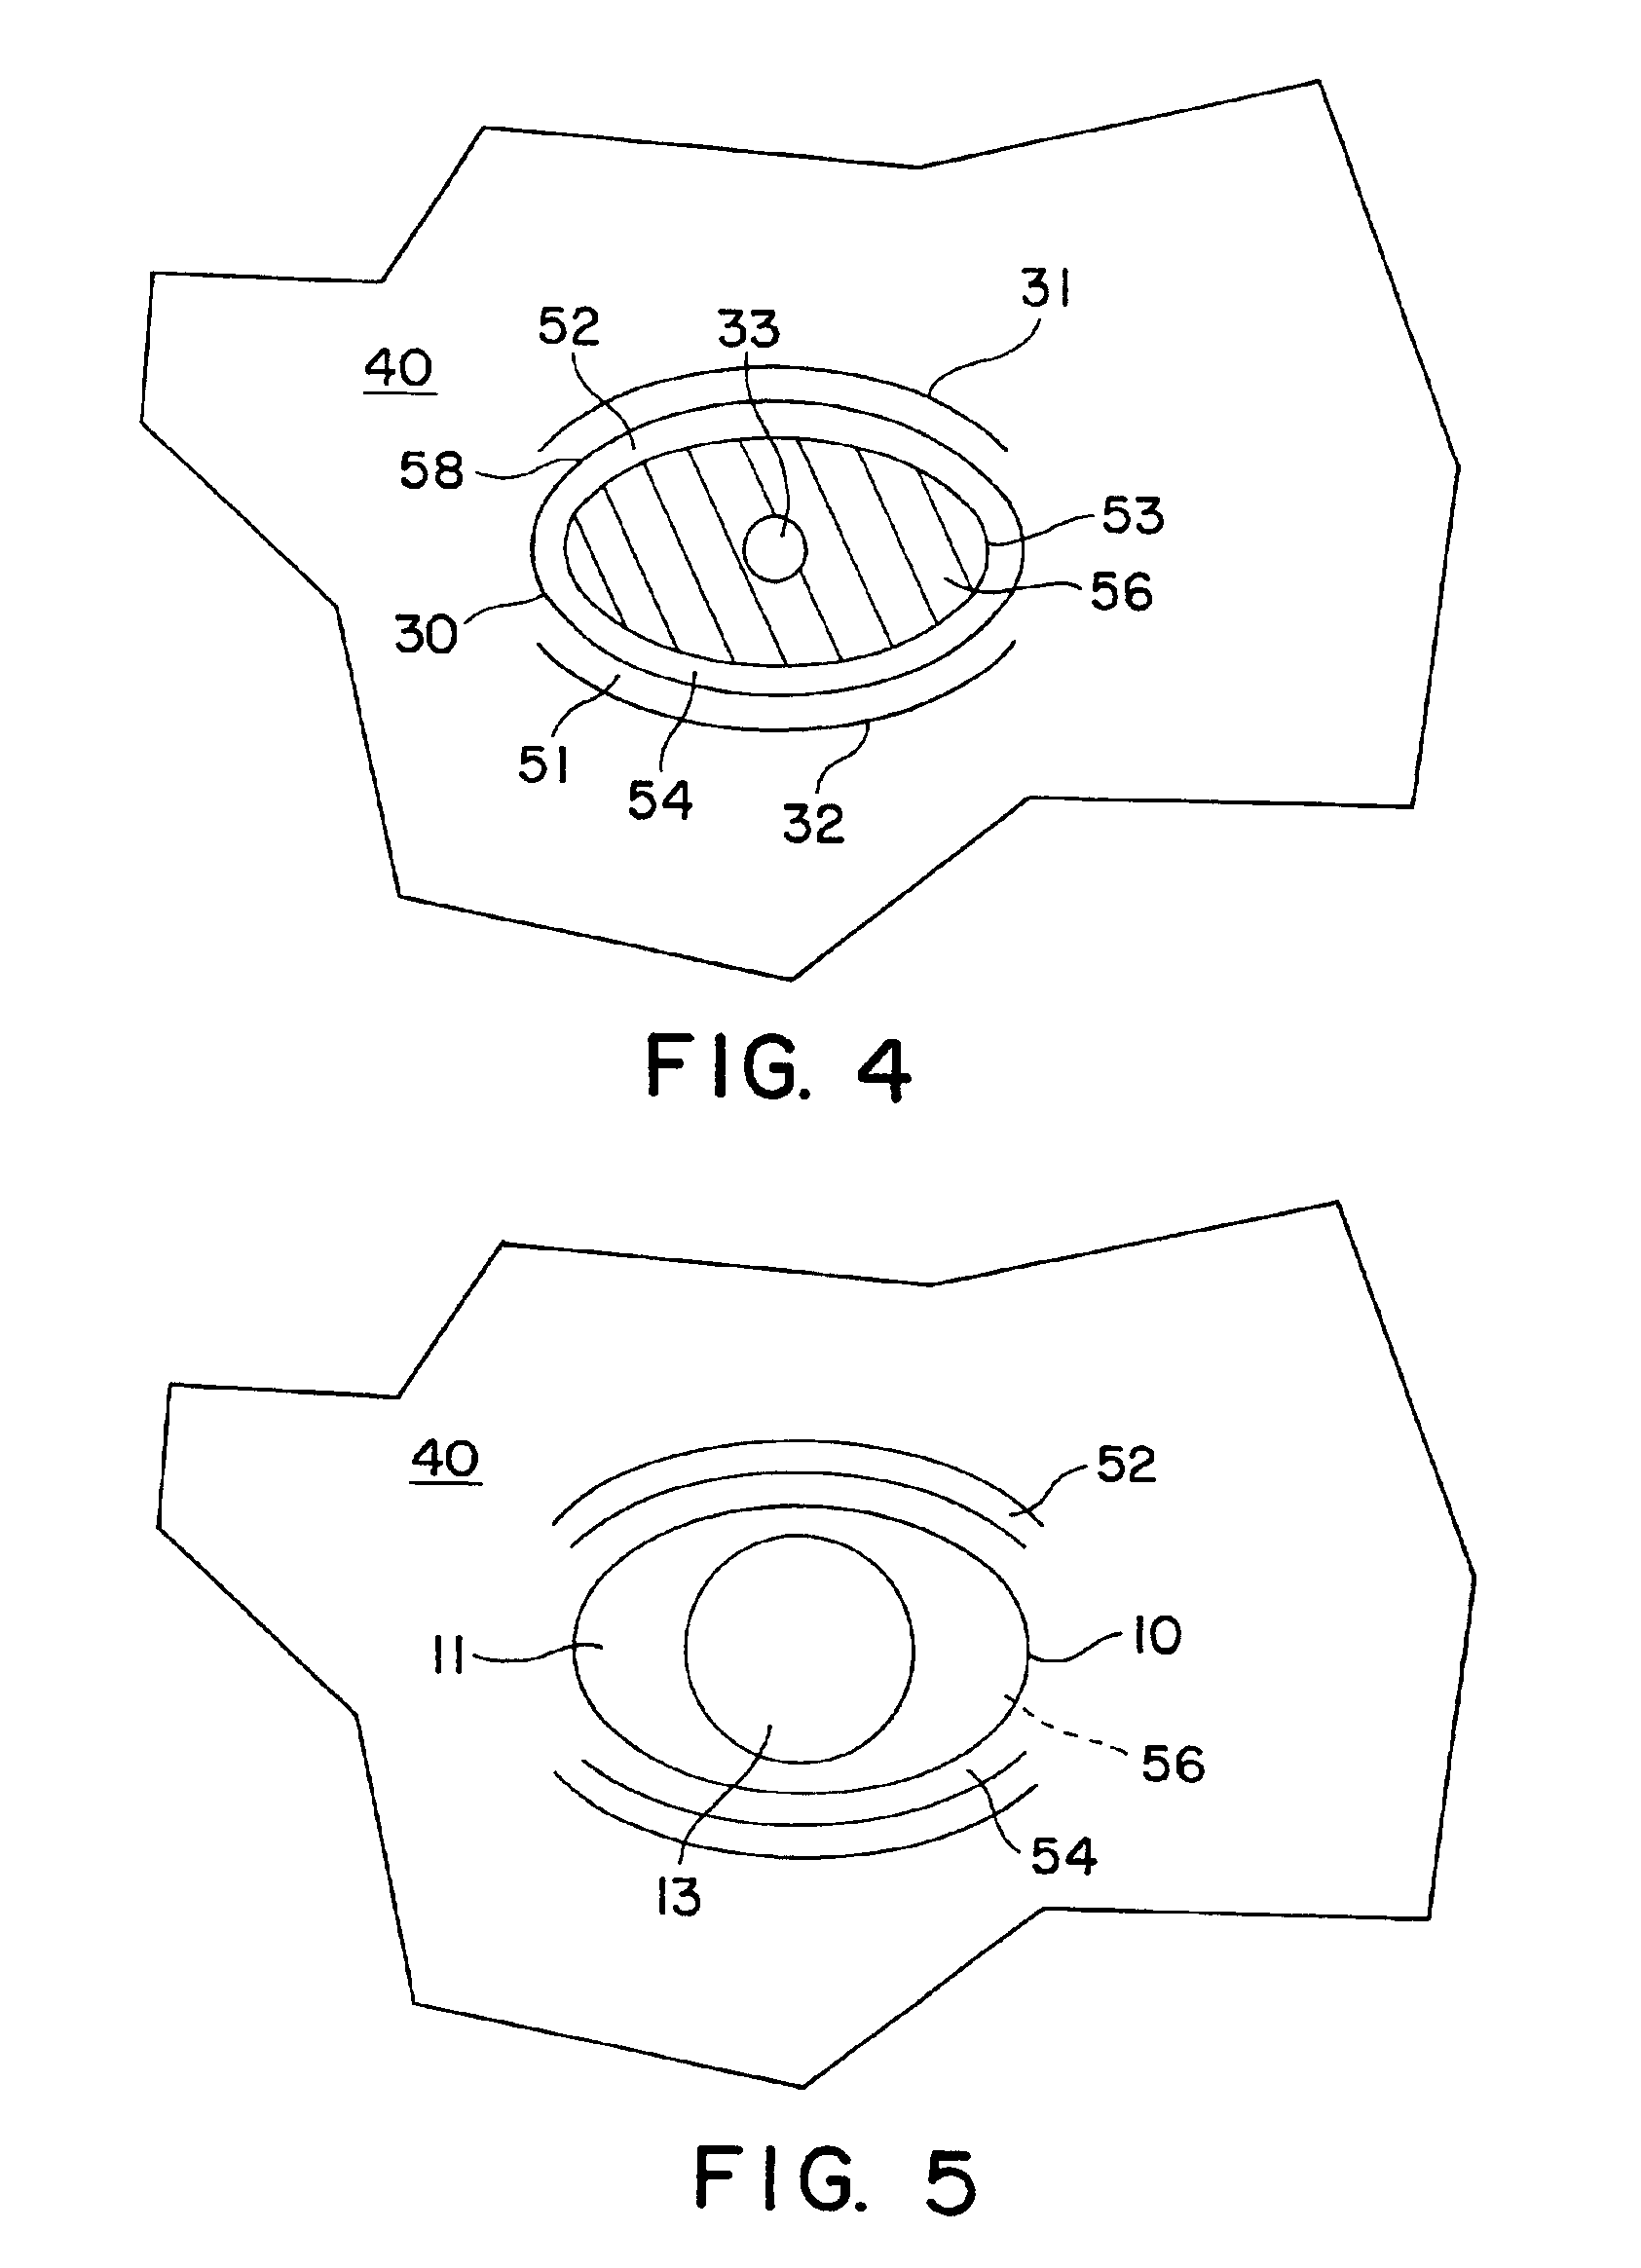 Manikin and eye device apparatus, methods and articles of manufacture